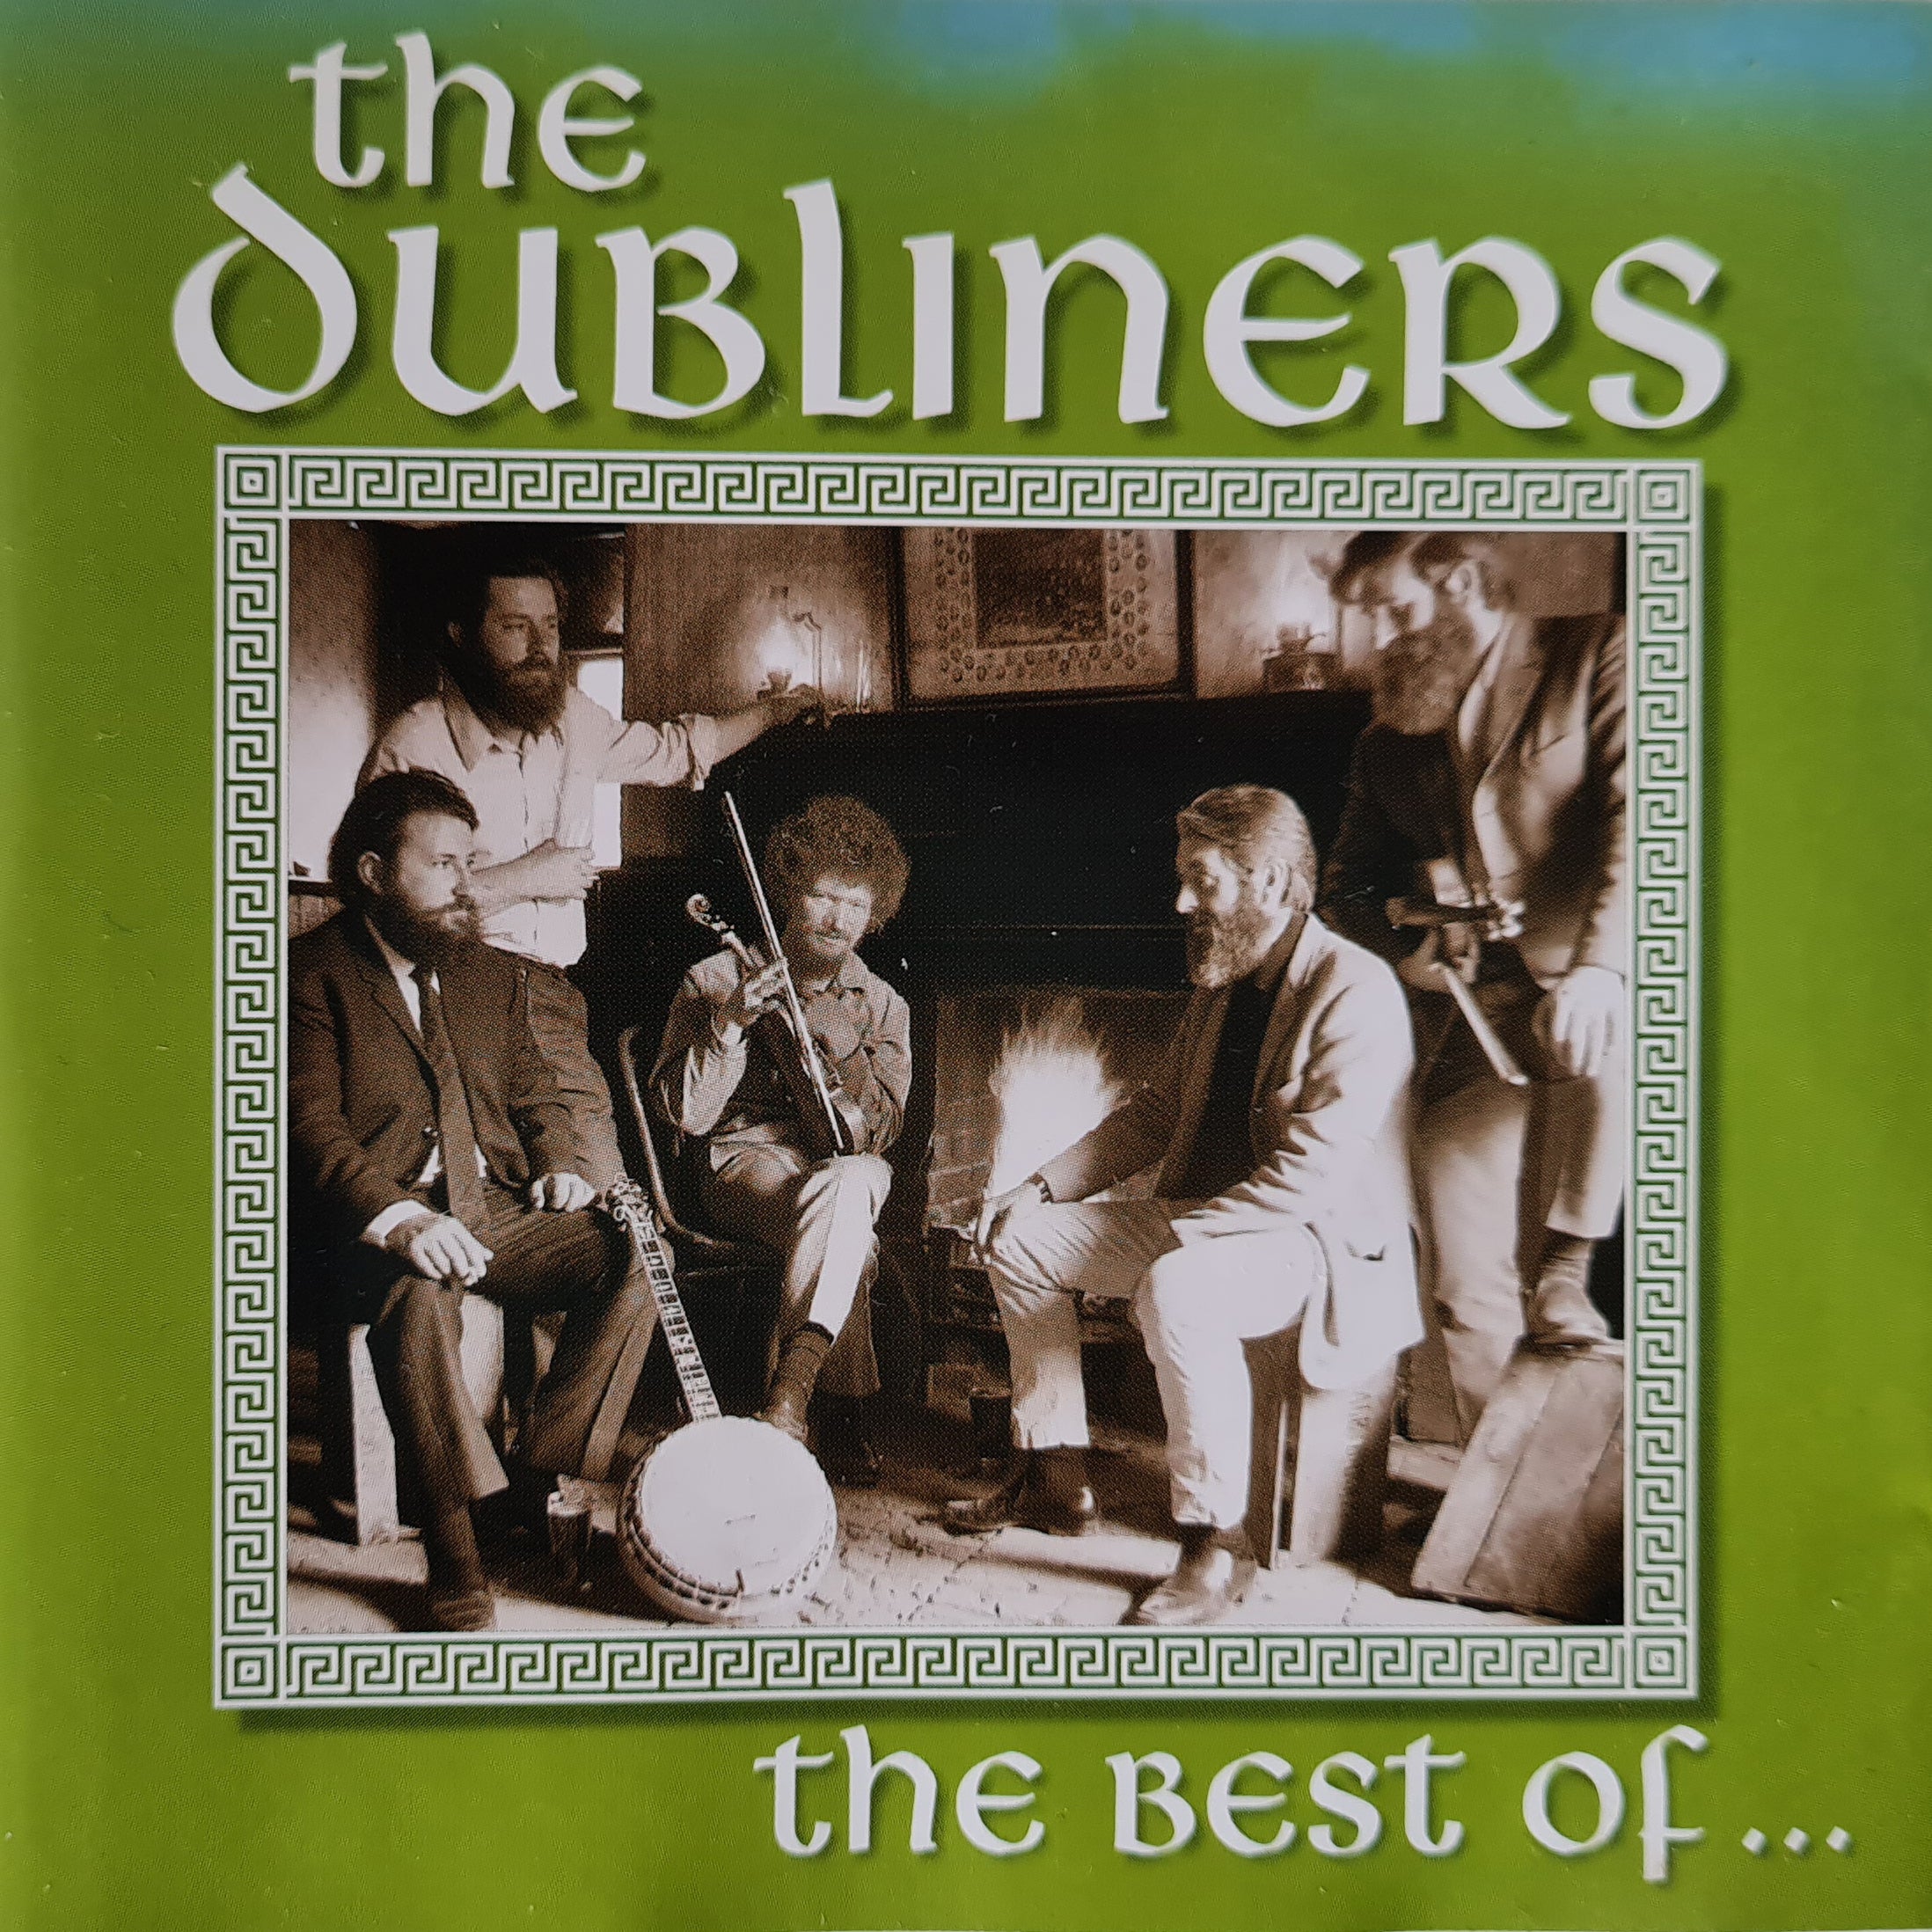 The Dubliners - The Best of... (CD)